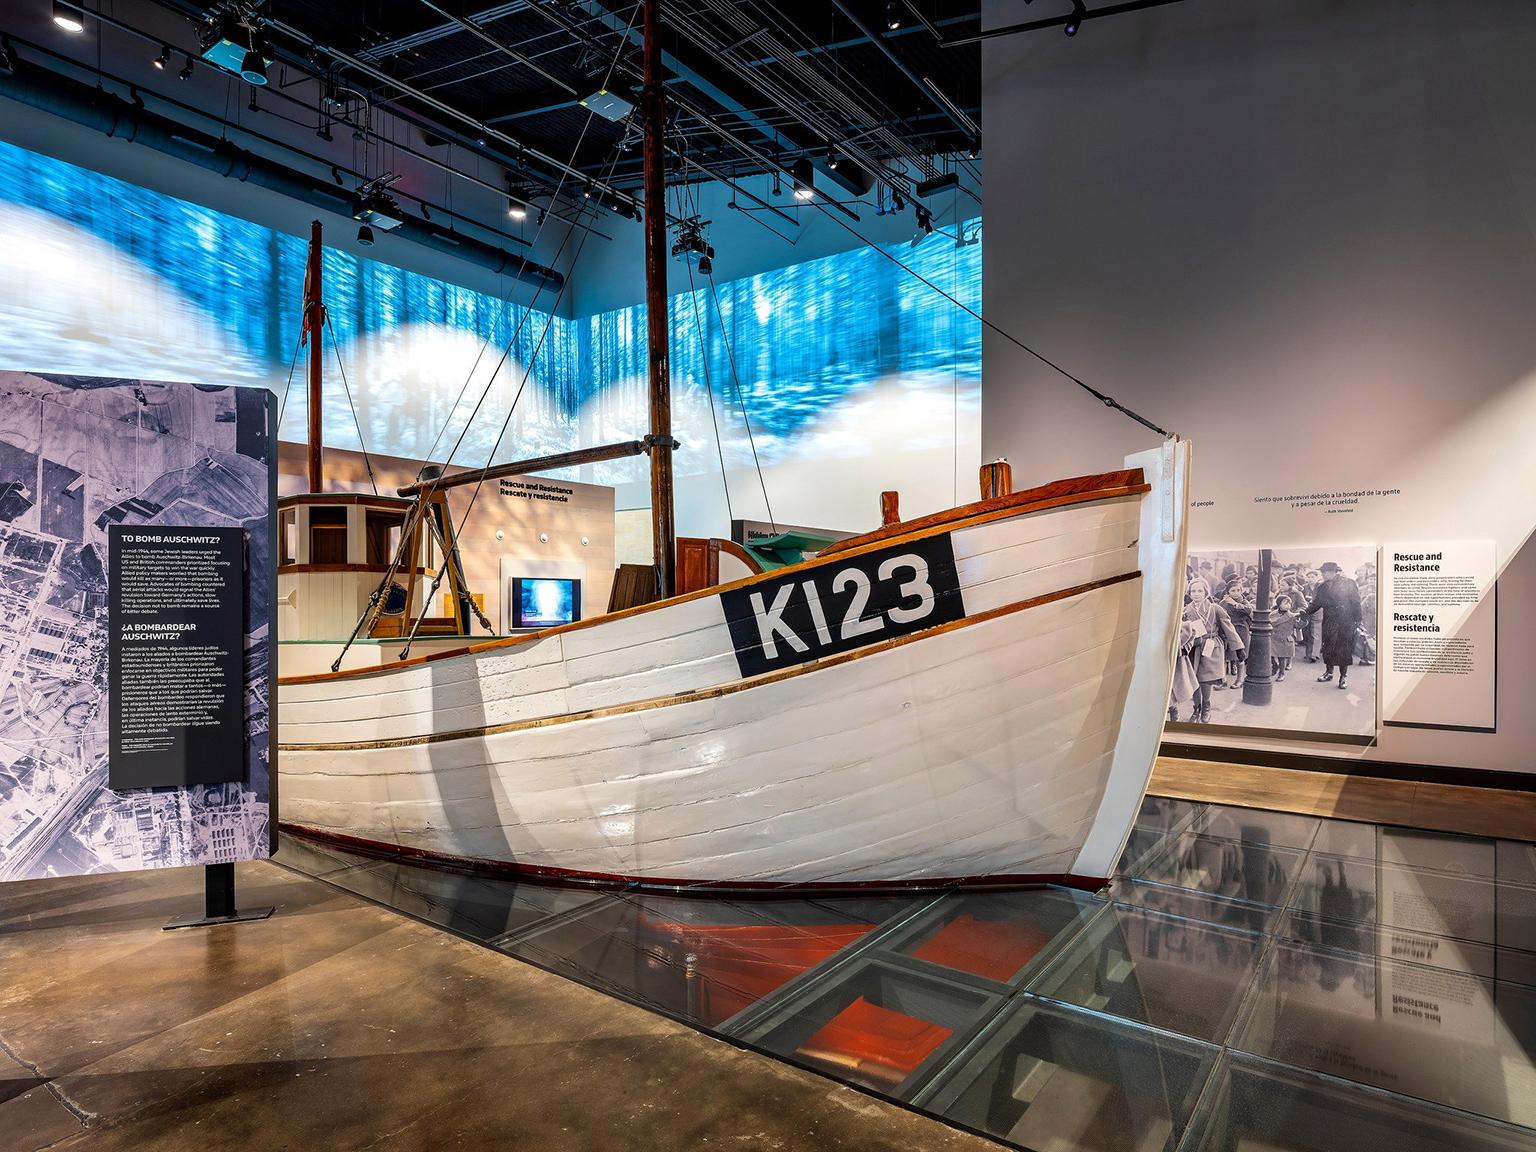 A boat in a Halocaust Museum surrounded by walkable glass floors